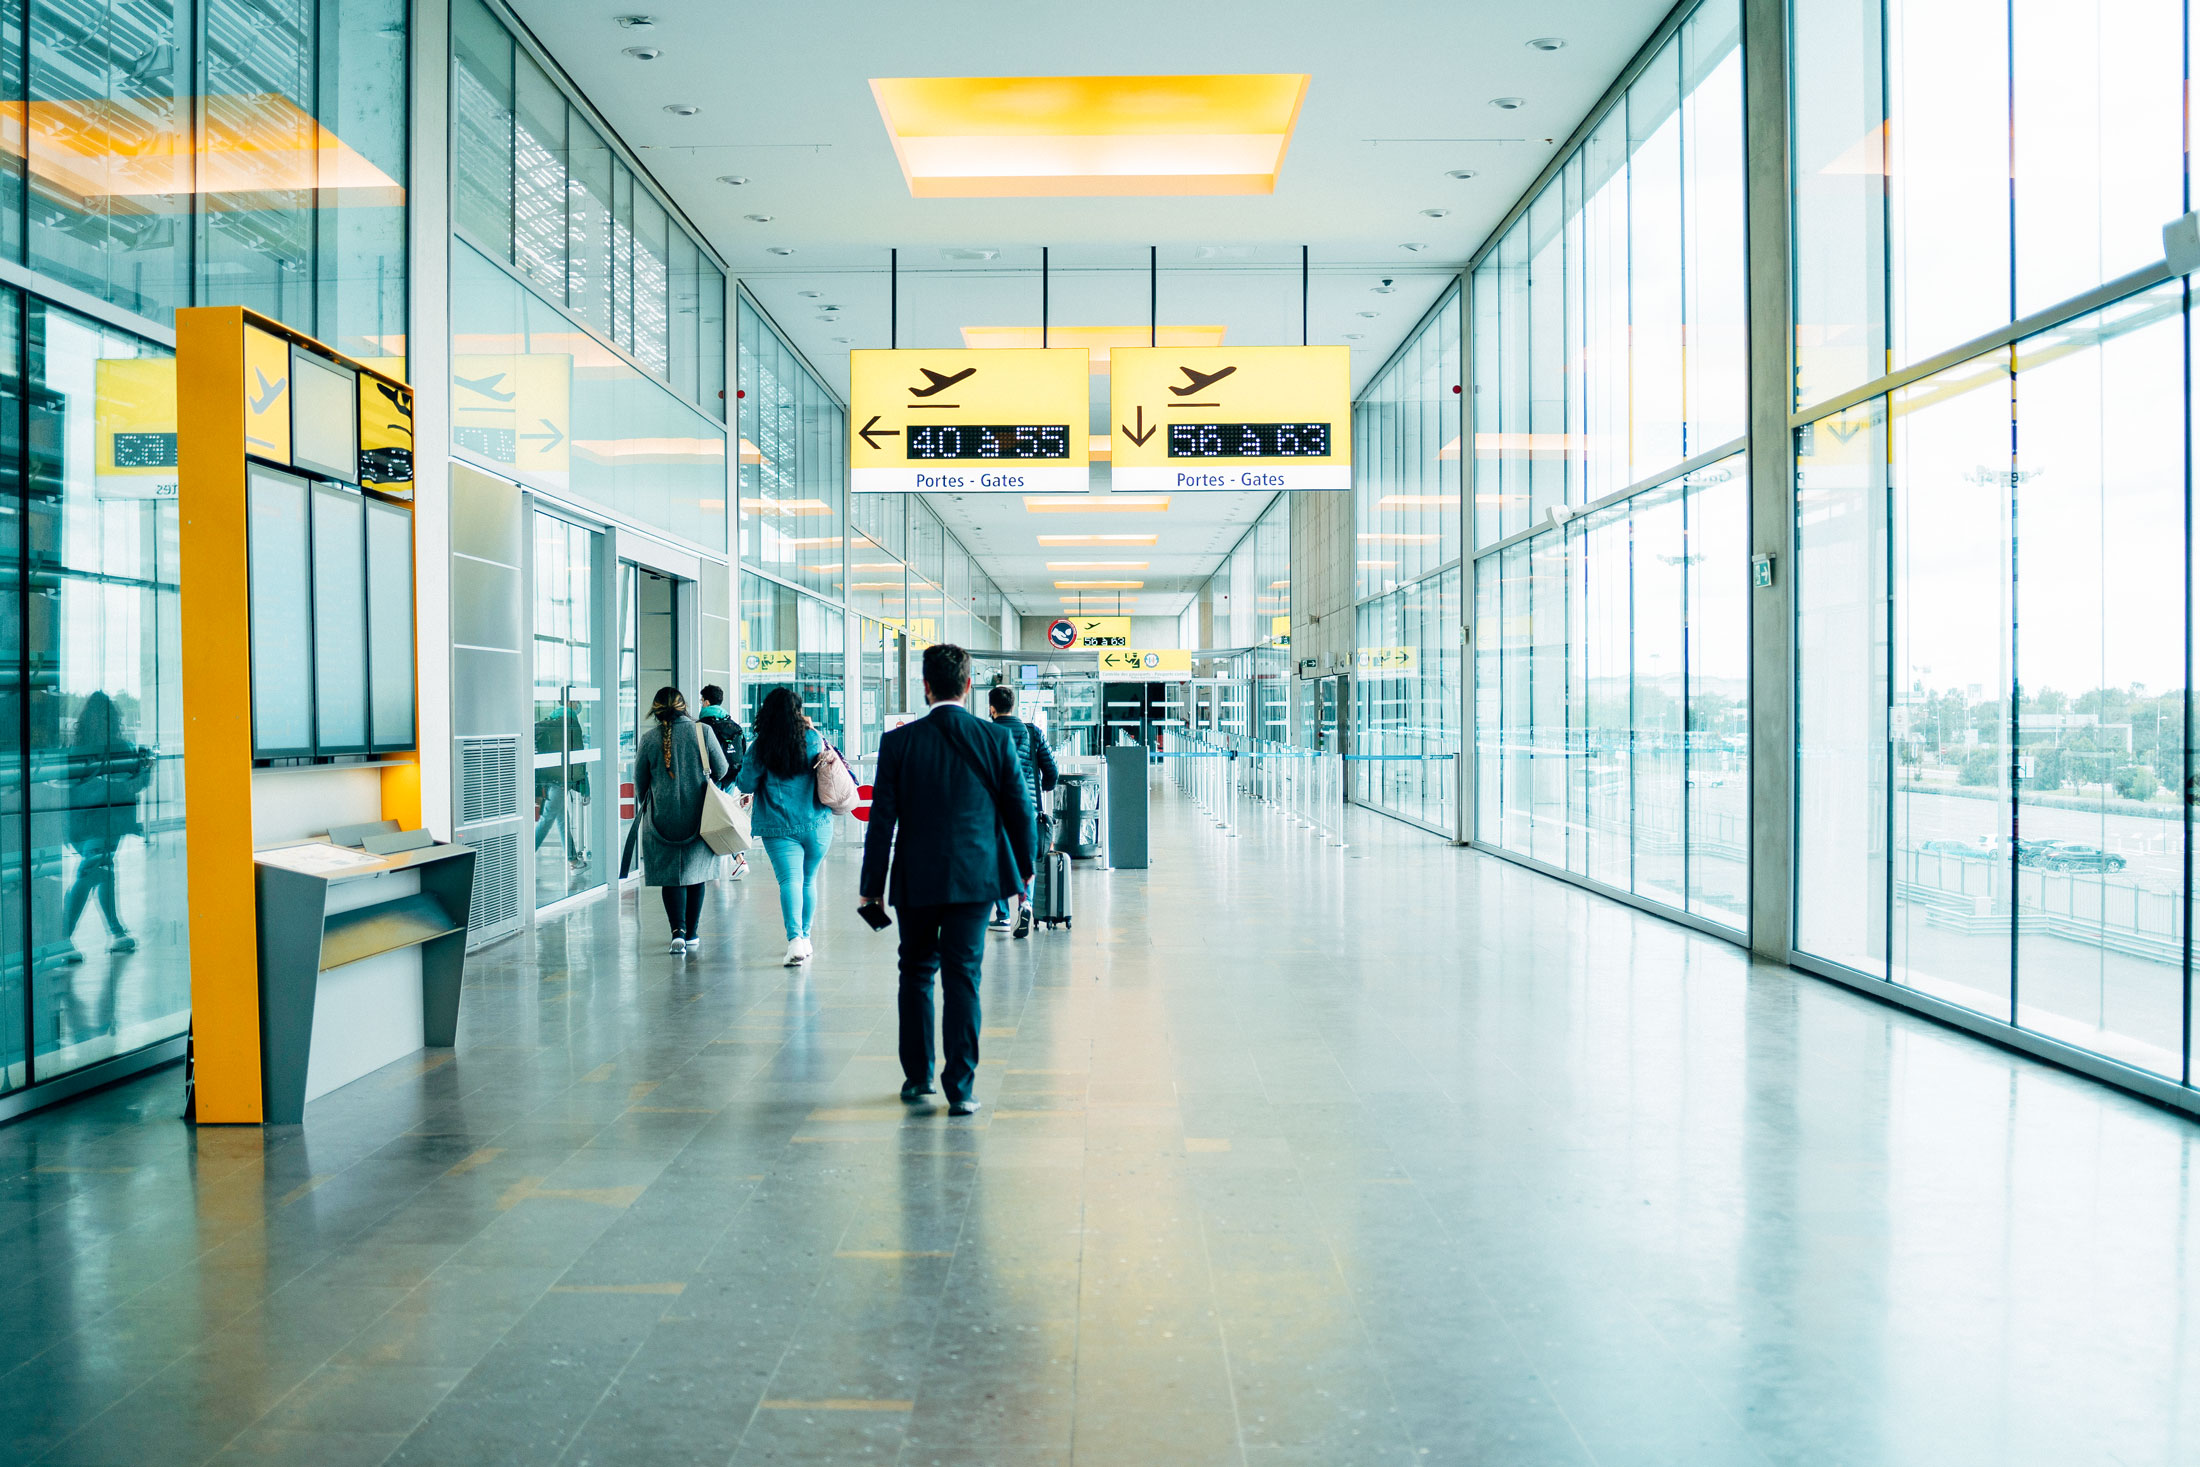 Photo showing an airport, showing glass windows on the right. Signage above a man walking down the middle. On the left are information points and a doorway.